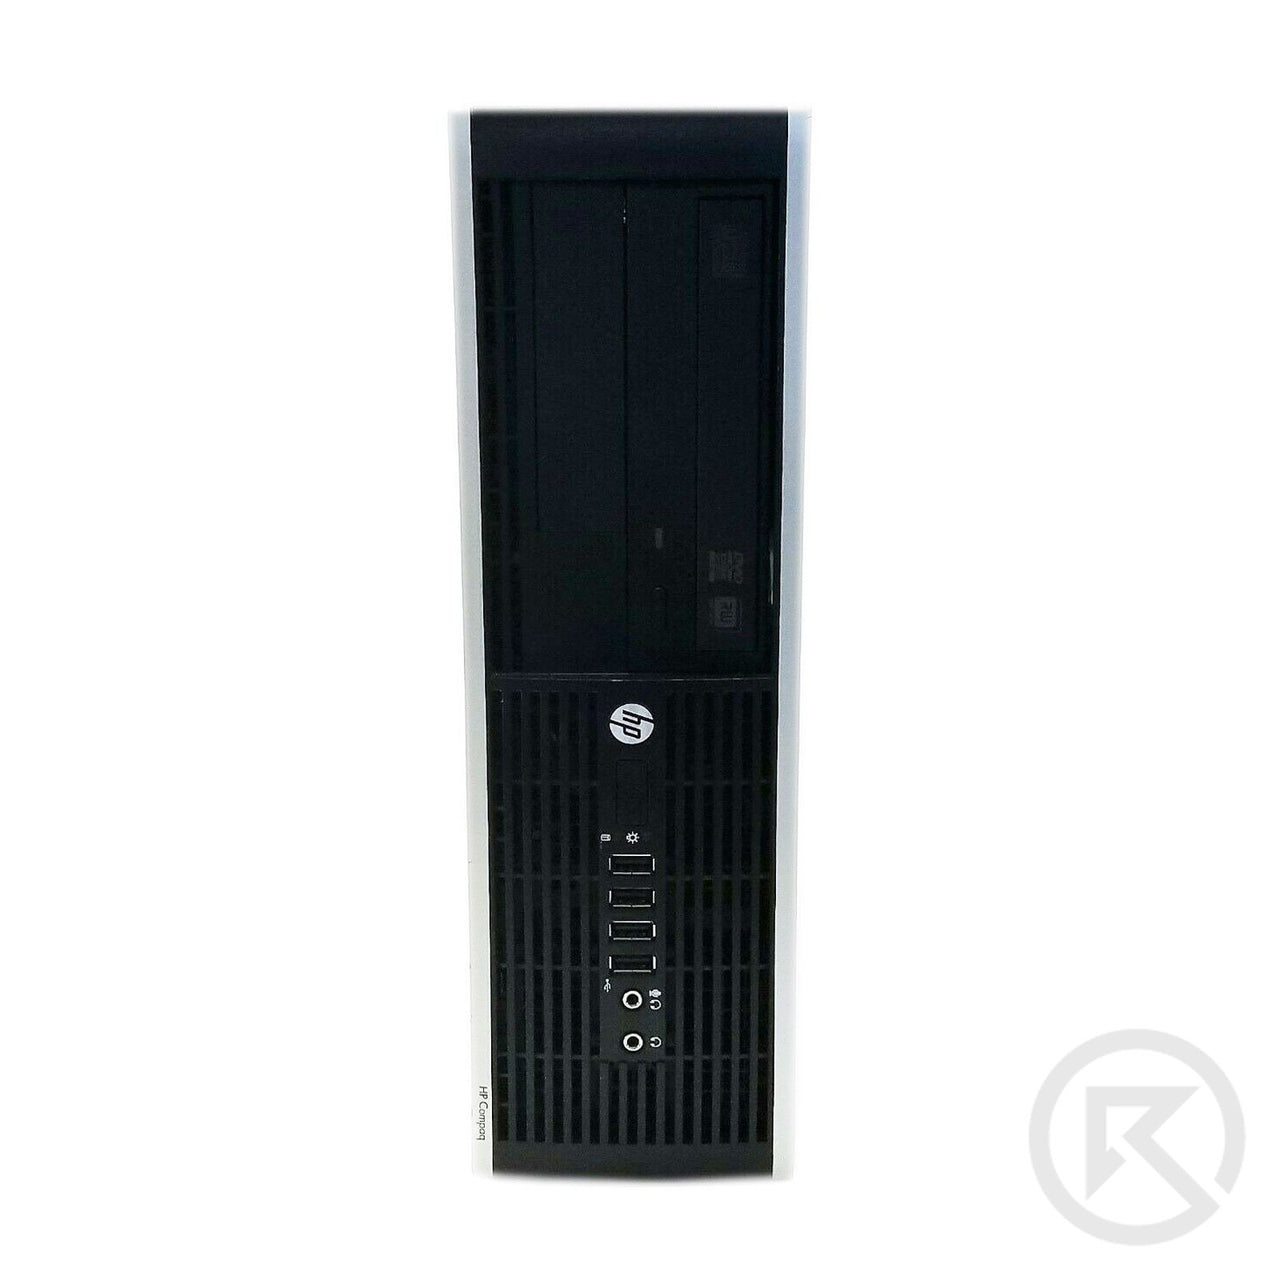 Hp Compaq Elite 8300 Intel Core I5 3rd Generation Small Form Factor-Computer-RefurbConnect-Refurbished-Computers-Laptops-Printers-New York